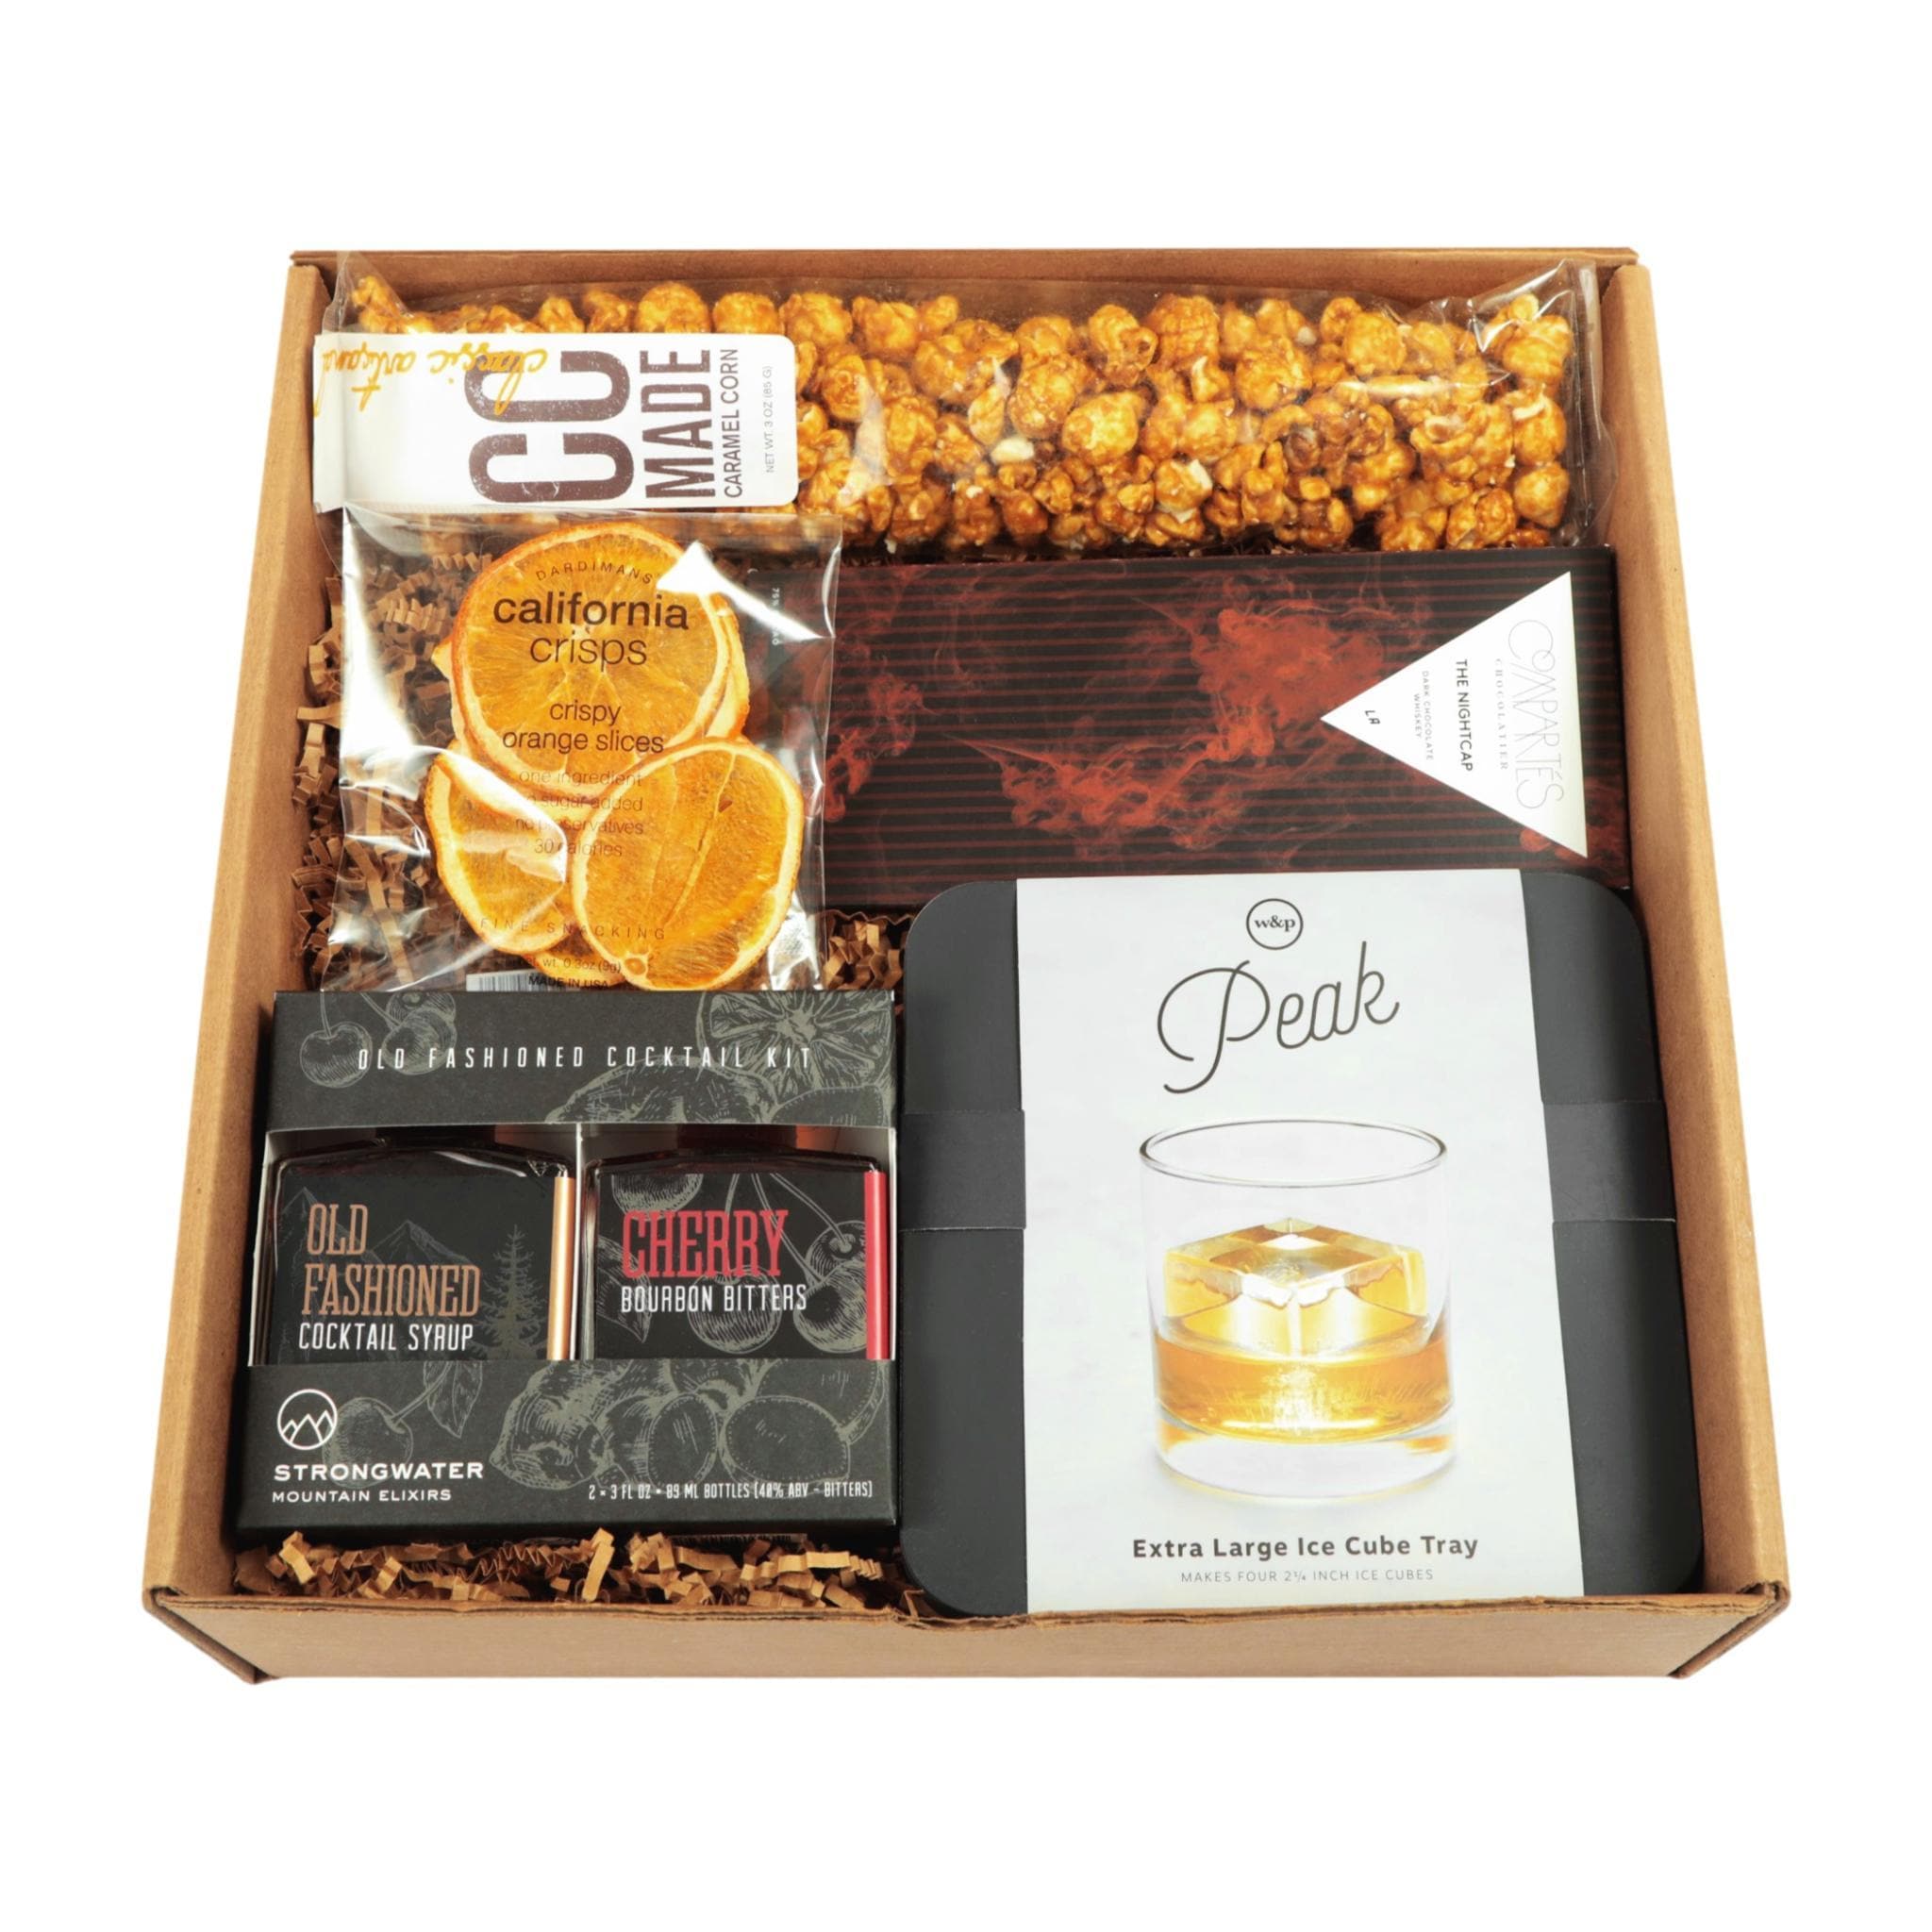 The Old Fashioned Gift Box, $ 110.00, Gifts That Give Back